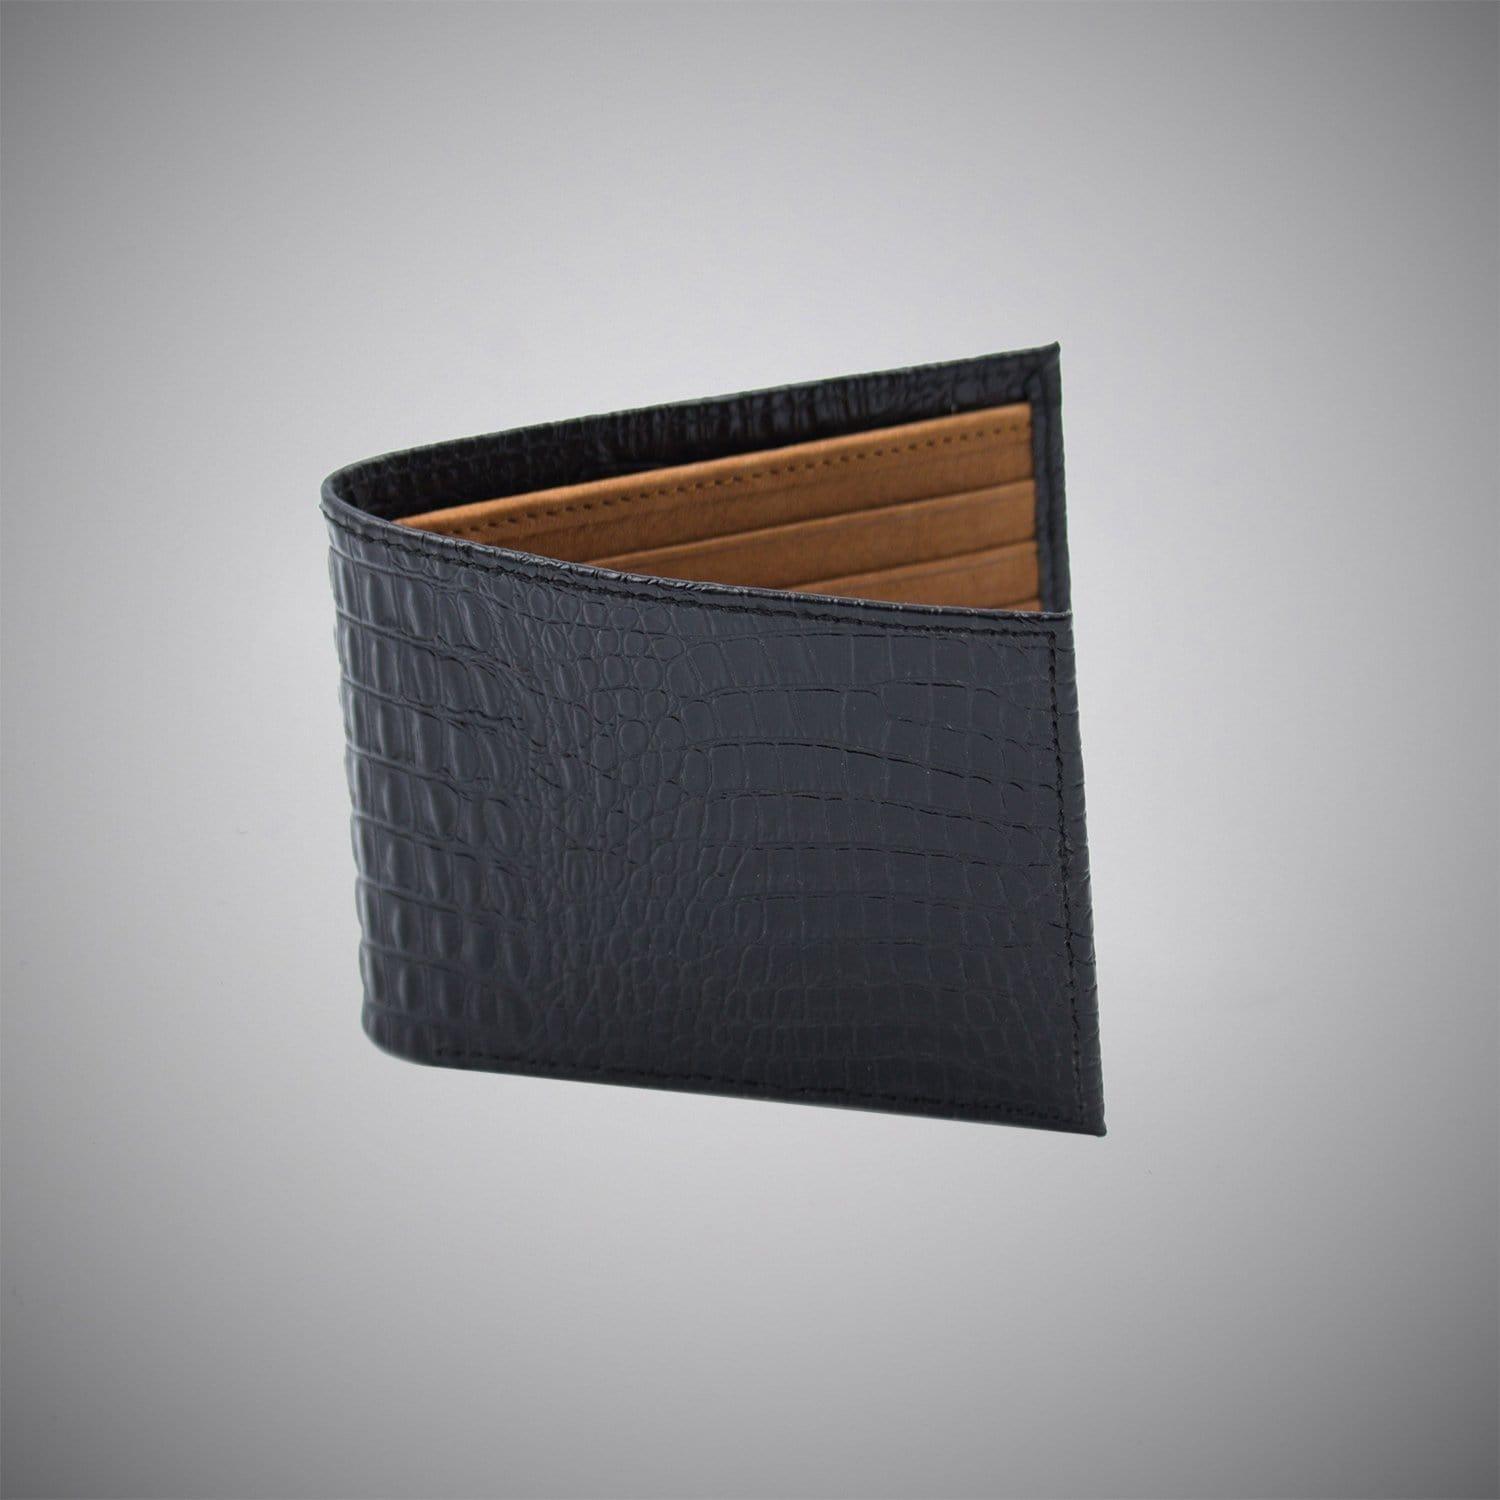 Black Crocodile Skin Embossed Calf Leather Wallet With Tan Suede Interior - Just White Shirts